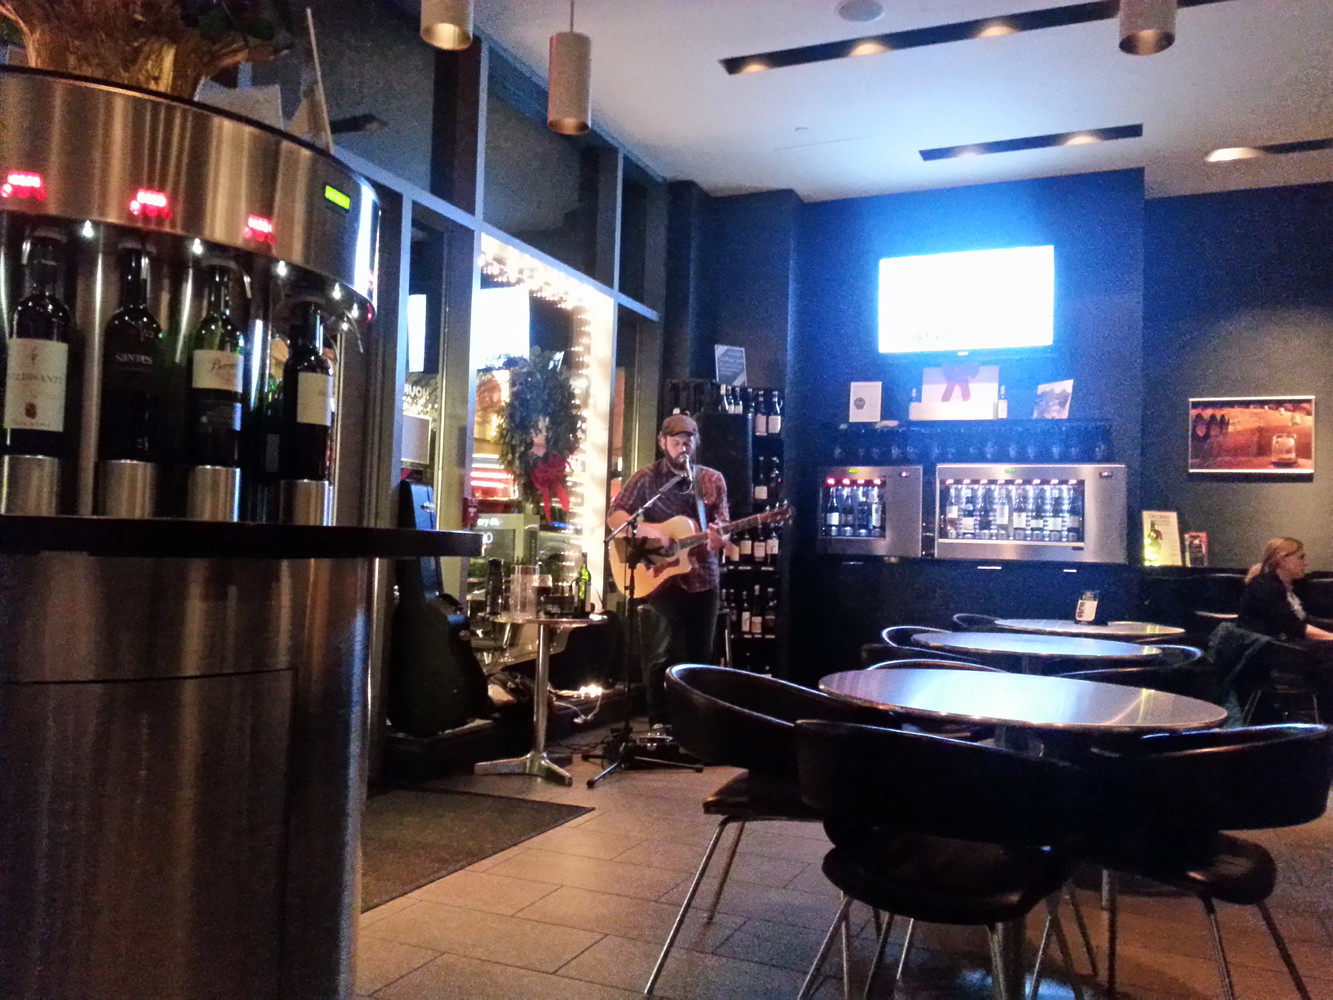 The interior of a restaurant with wine bottles stacked in shelves and a guitarist performing live music